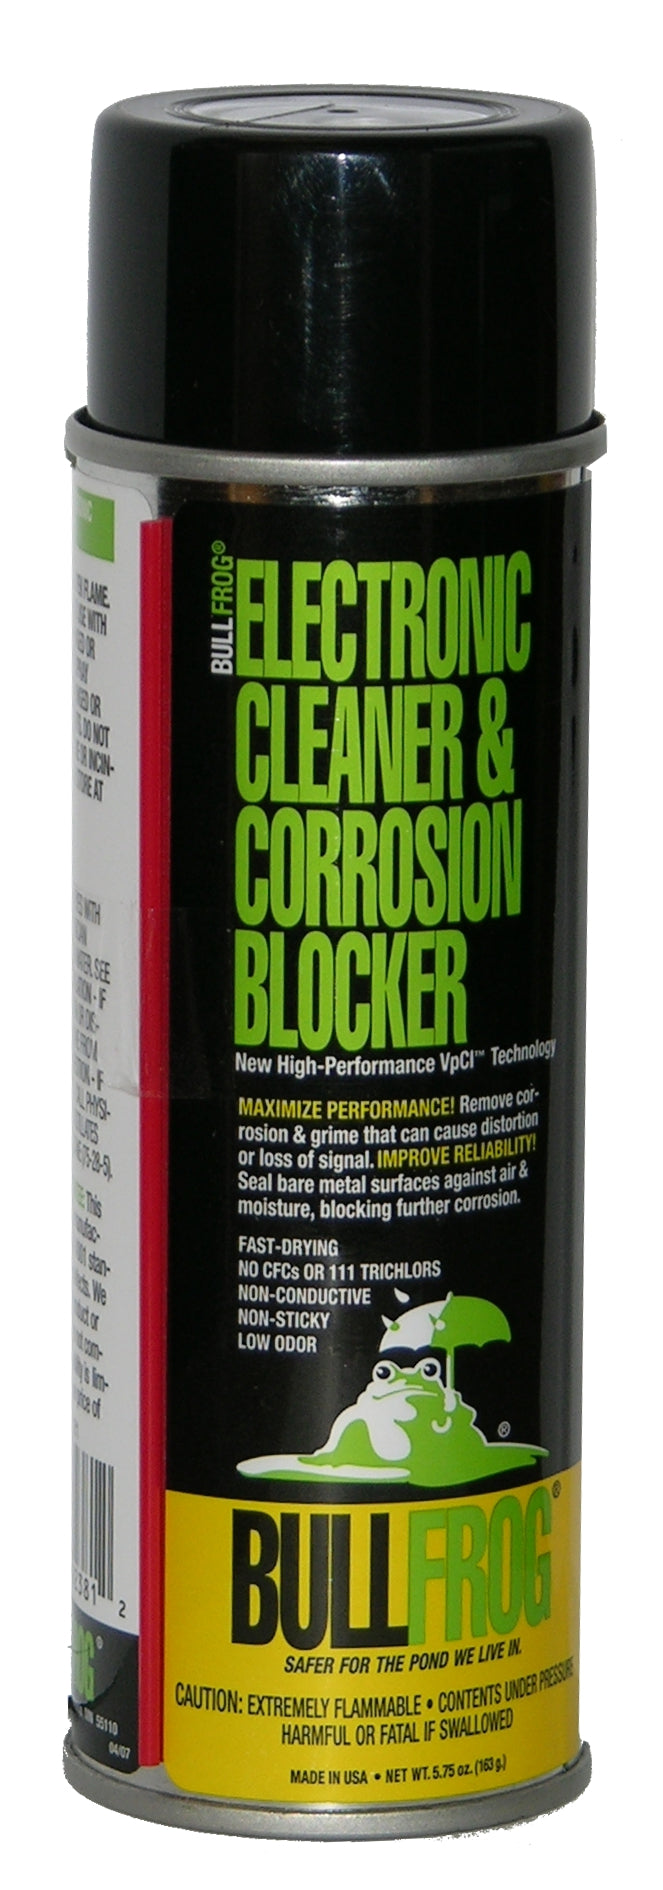 Bull Frog, BullFrog 92381 7oz Electronic Cleaner & Rust/Corrosion Blocker Cleans & Protects